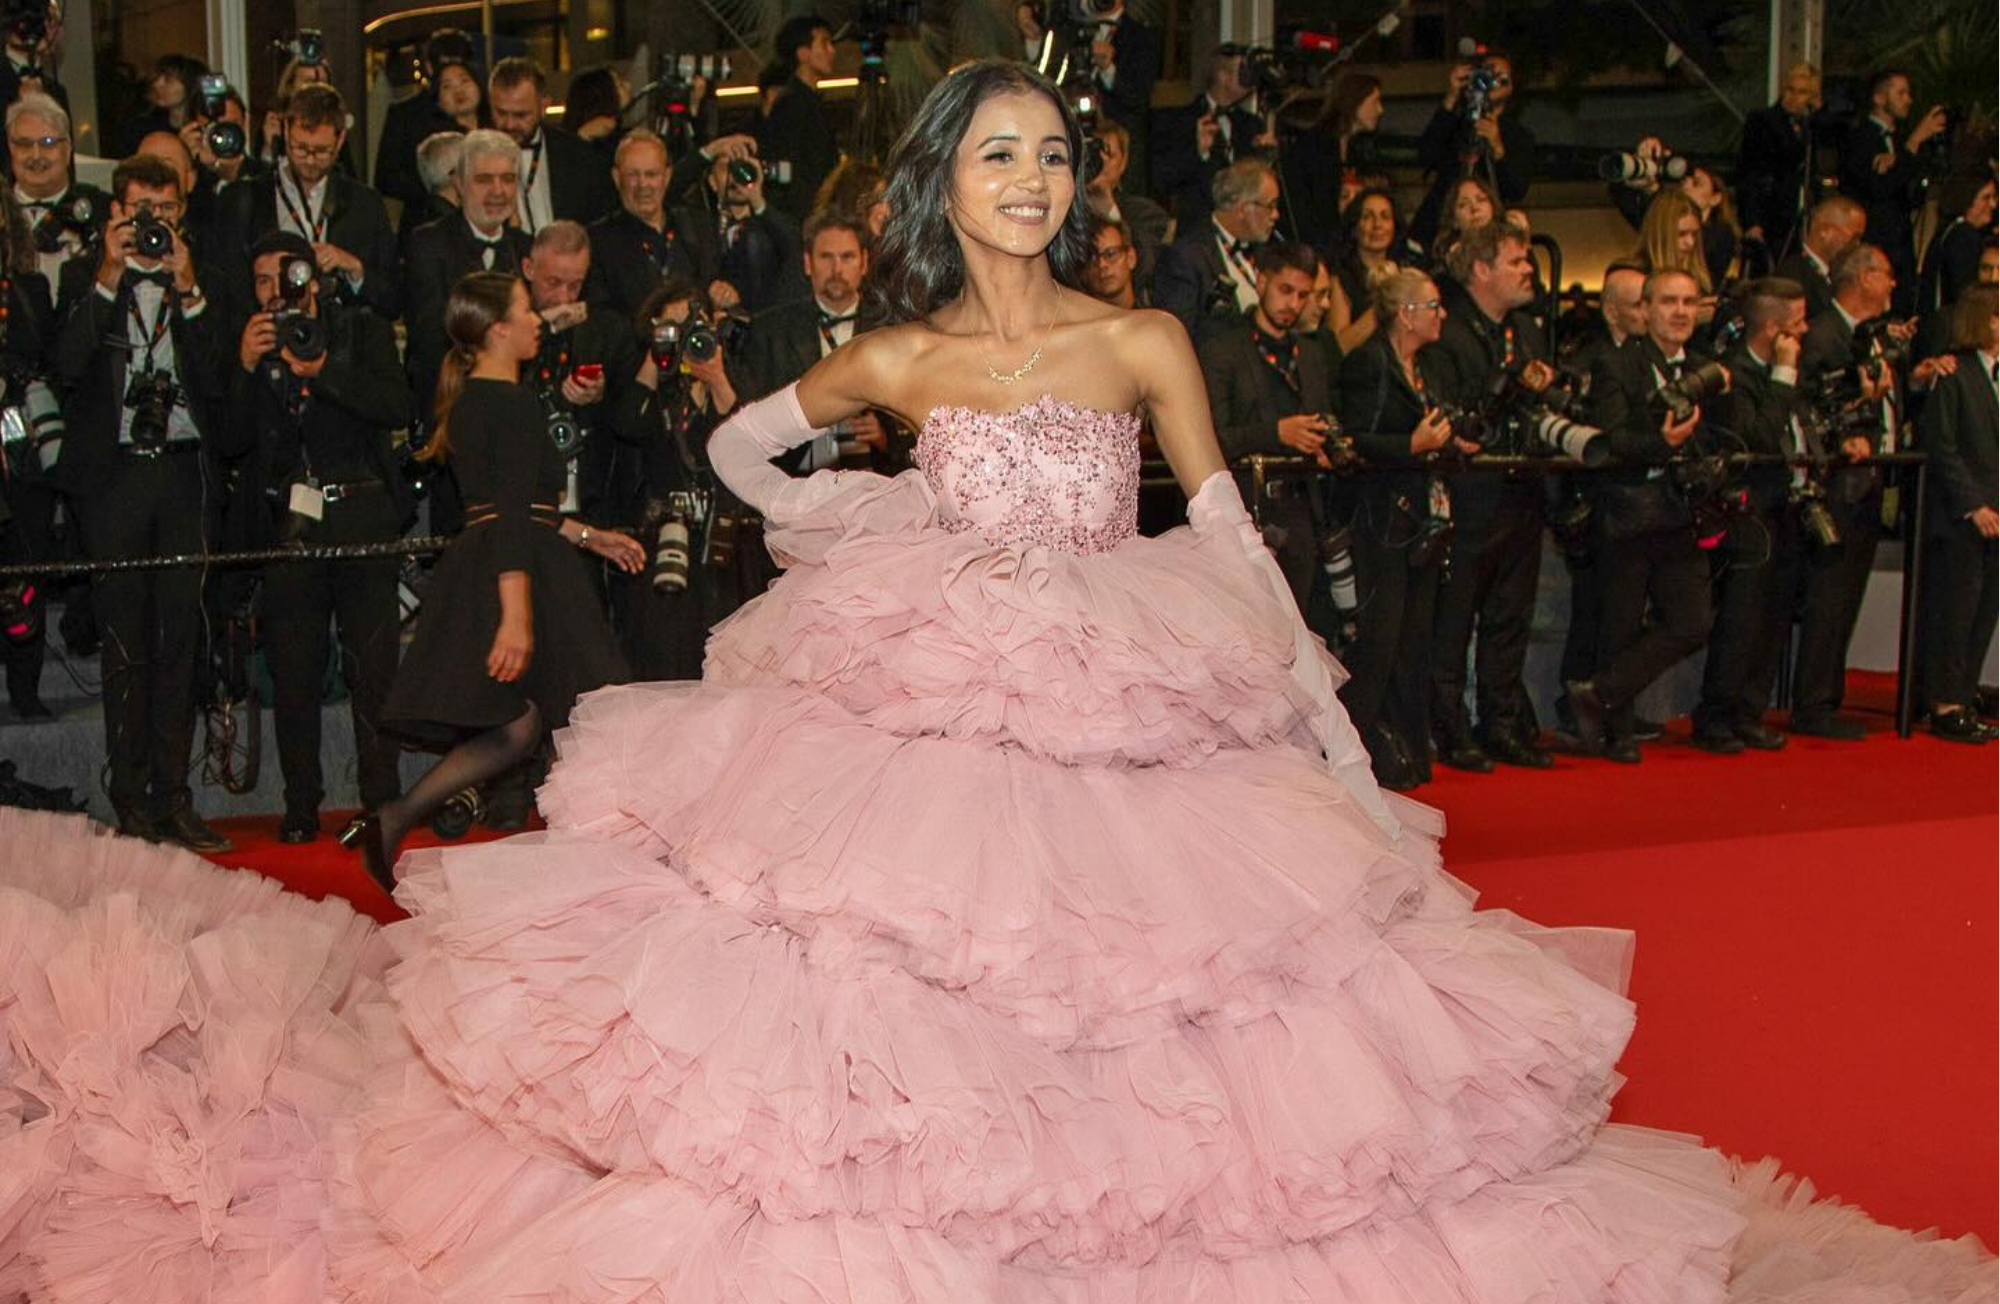 Nancy Tyagi’s Handmade Cannes Film Festival Gowns That Are Blowing Up The Internet